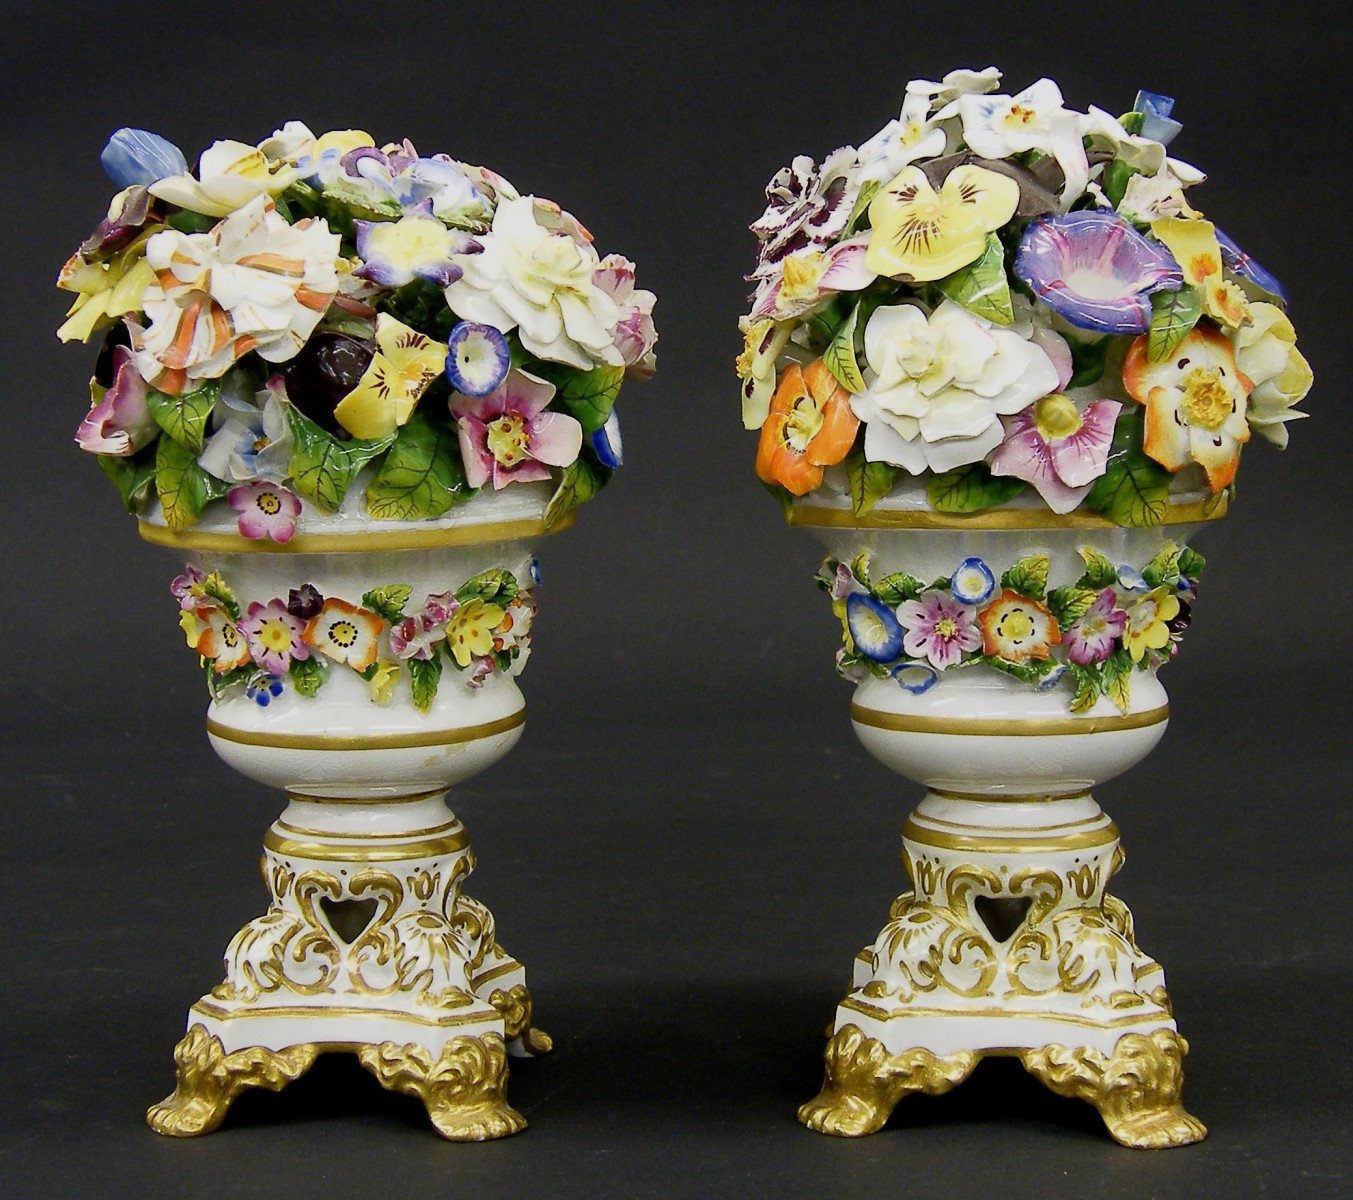 Pair of Derby porcelain floral bouquets, set within gilded quadrafoil urns, 7" high (2) (one